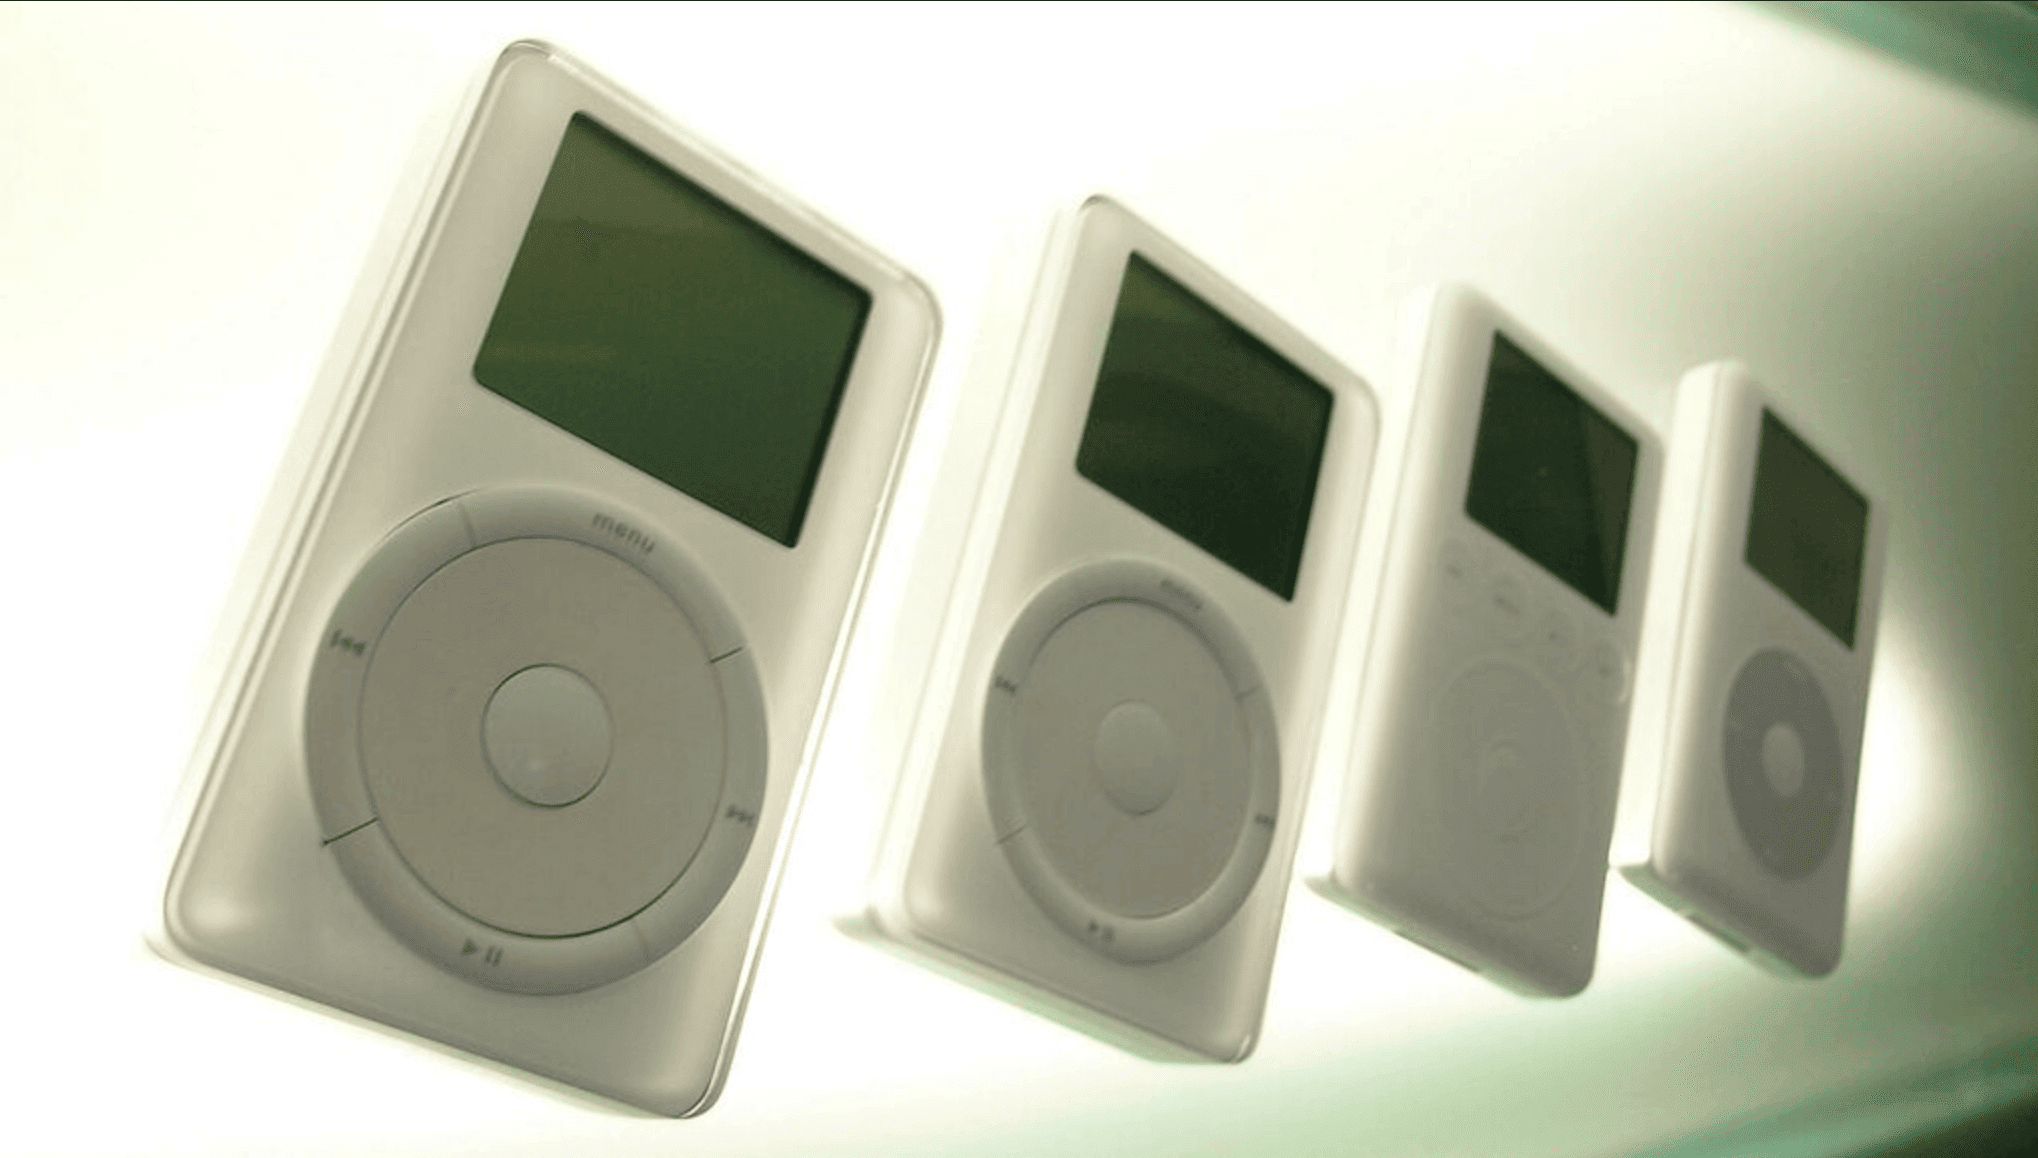 First-Generation iPod sold for shocking $29,000